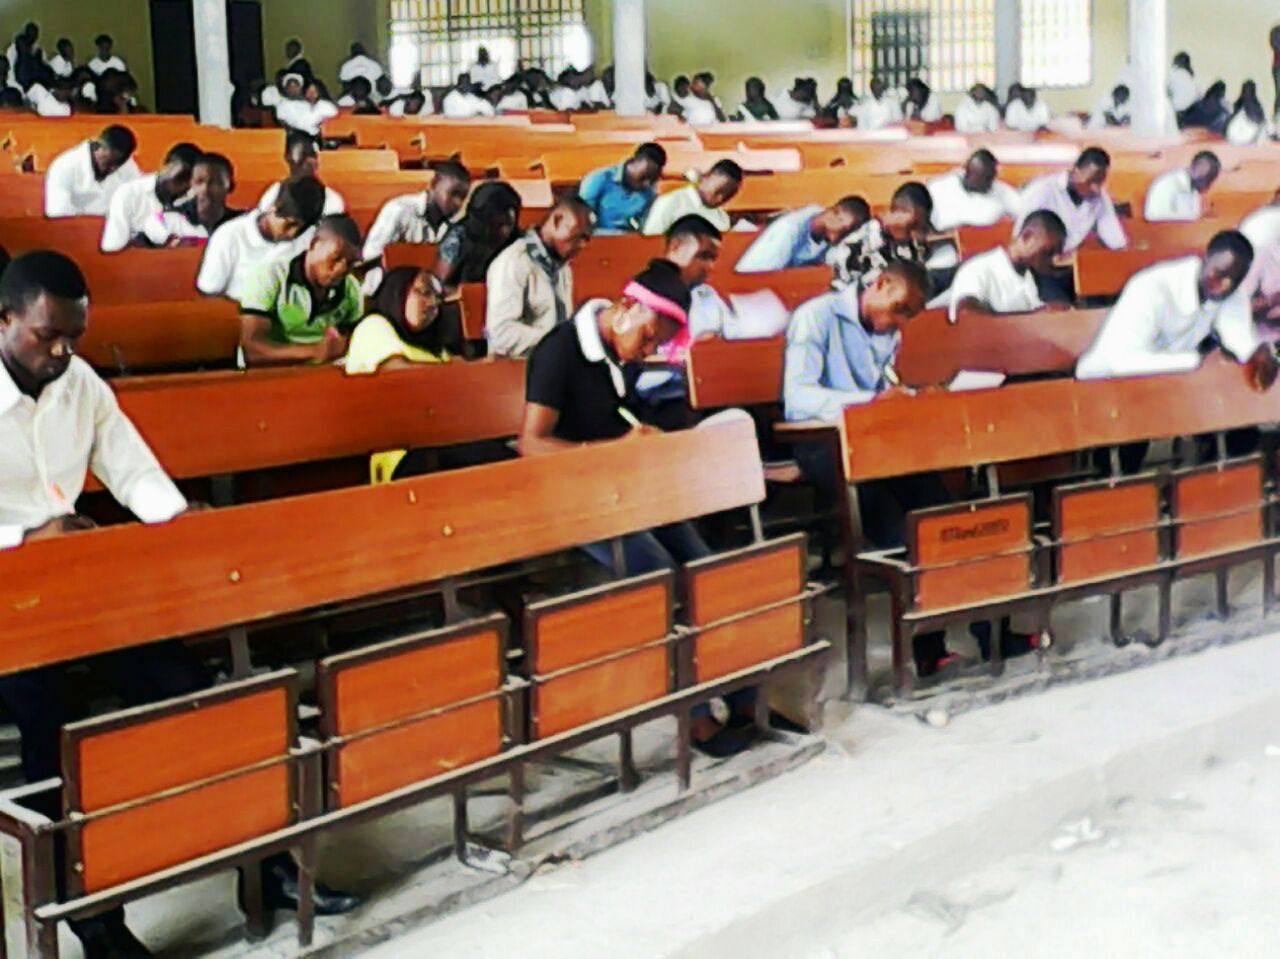 The intending COE Akamkpa Students Union leaders during the aptitude test